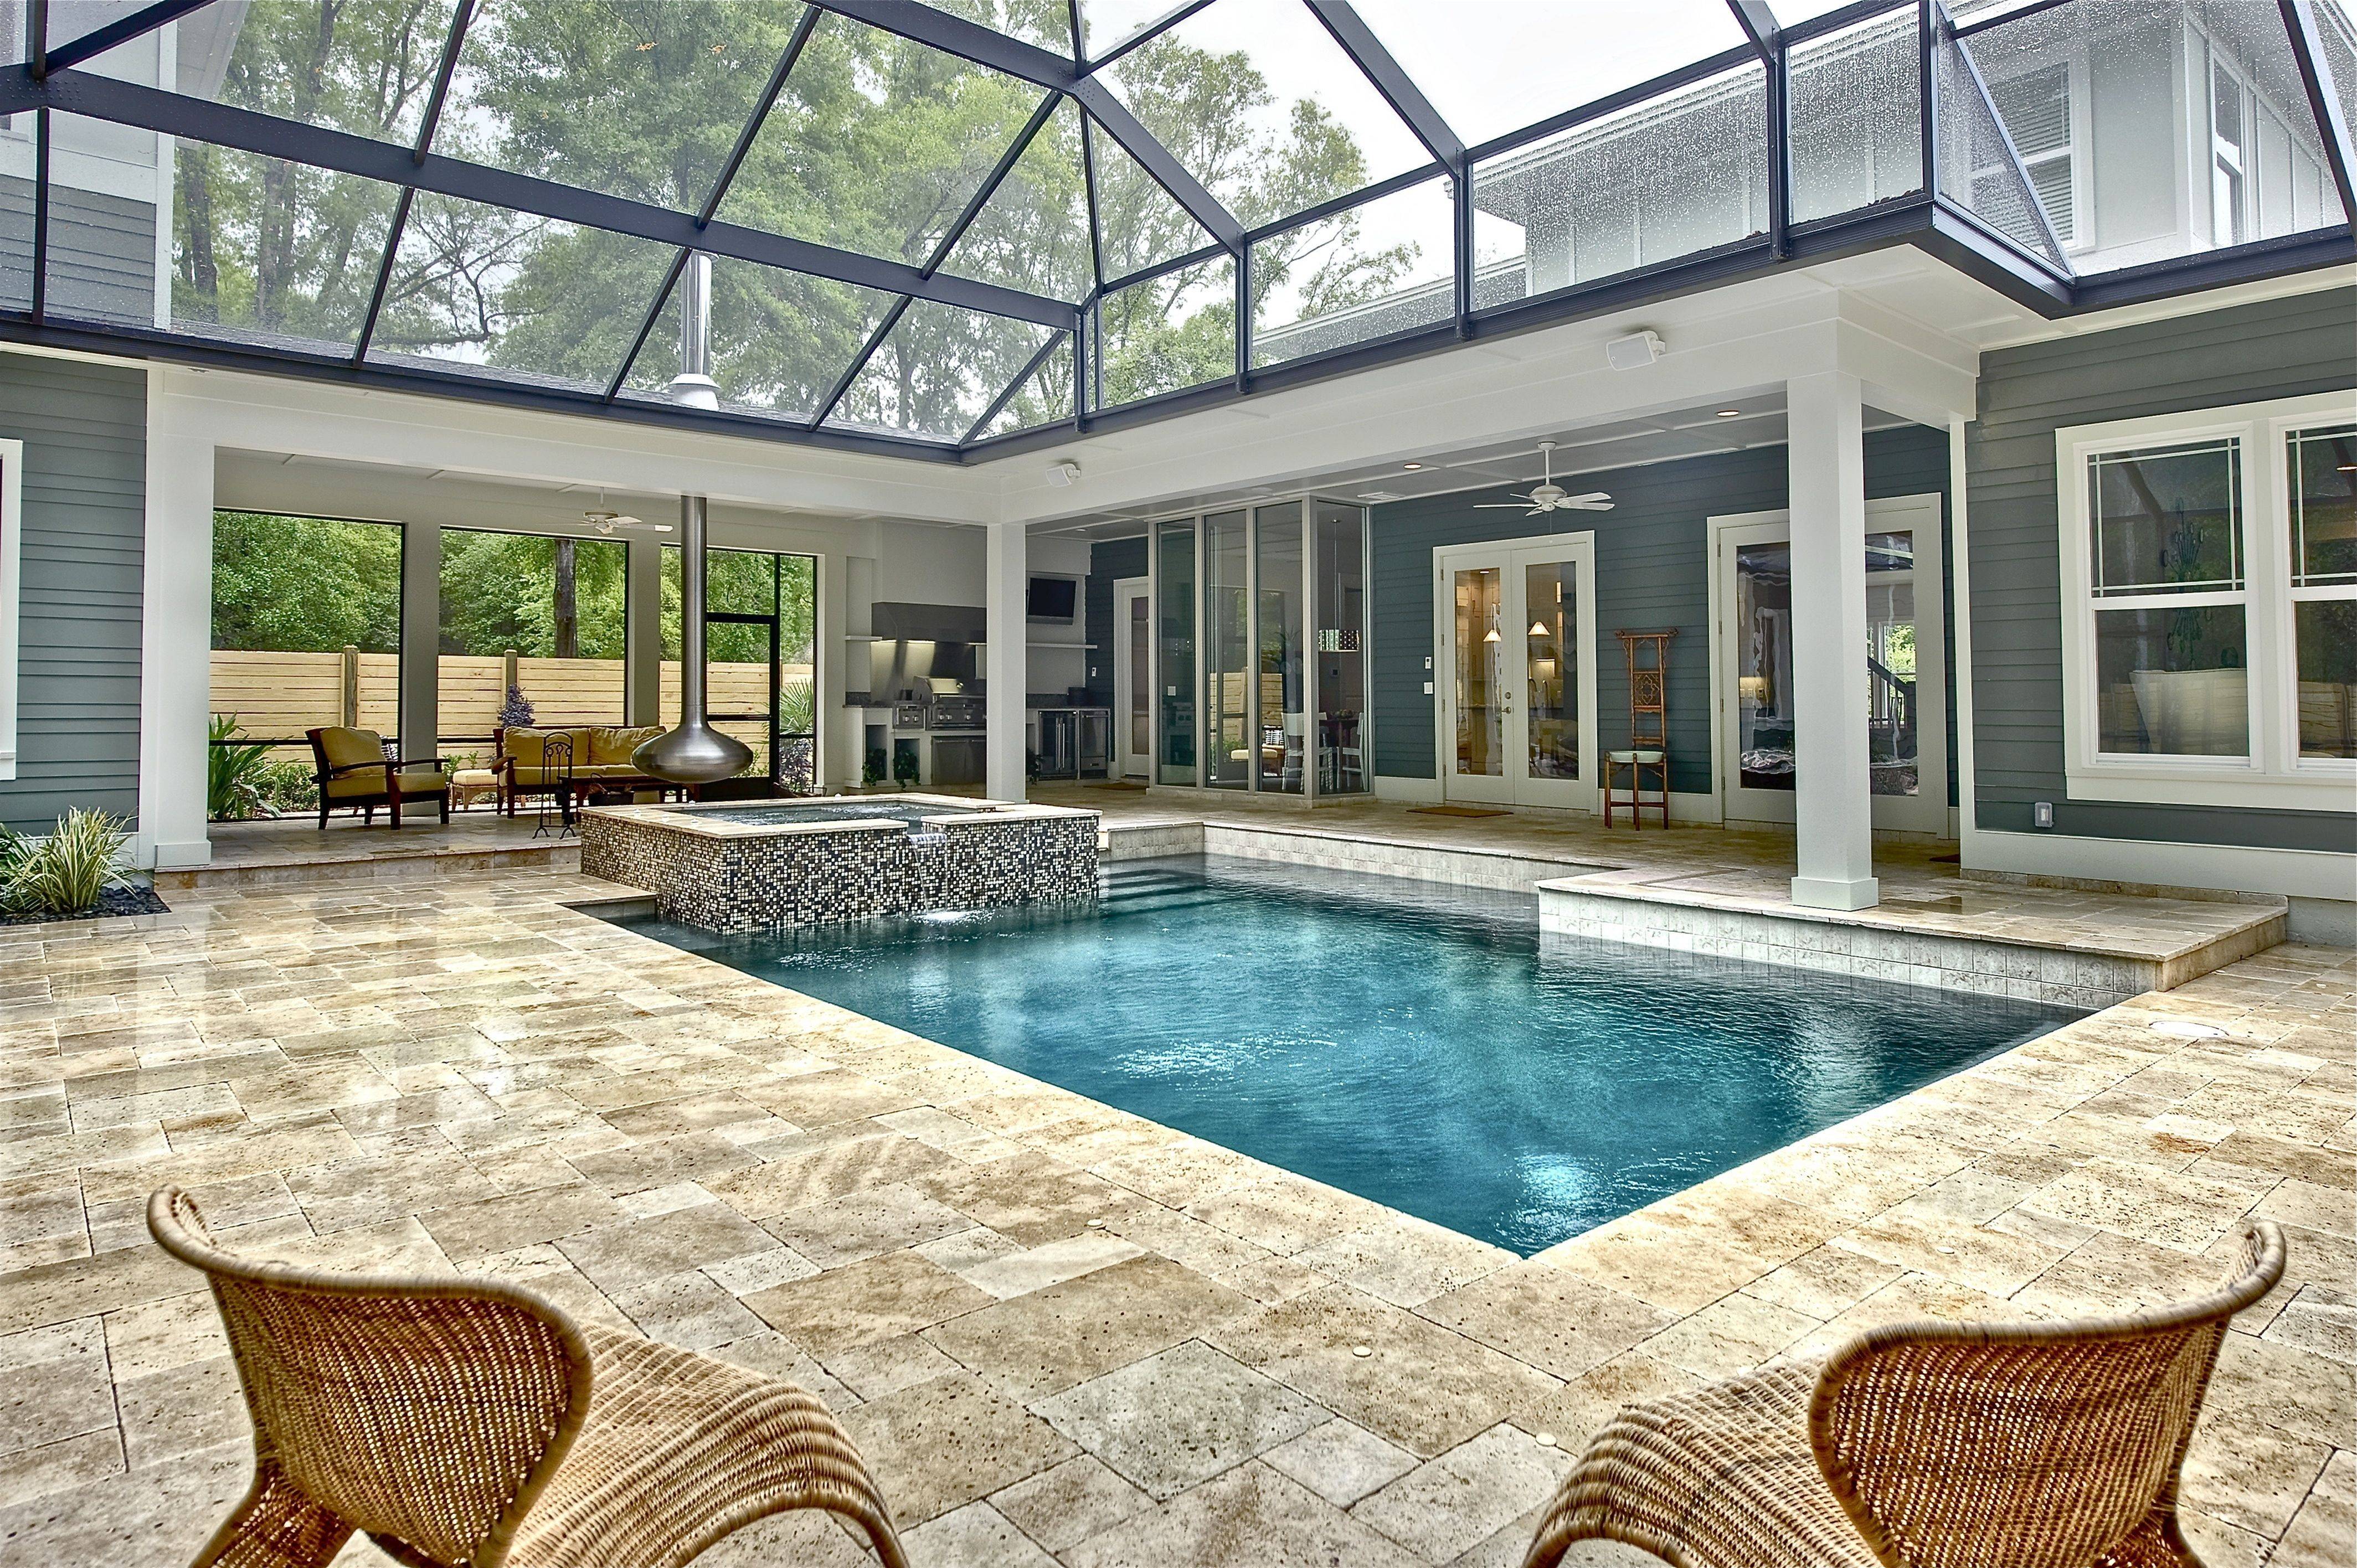 Houses With Indoor Pools Beautiful 20 Top And Amazing Indoor Swimming Pool Design Ideas For Of Houses With Indoor Pools 